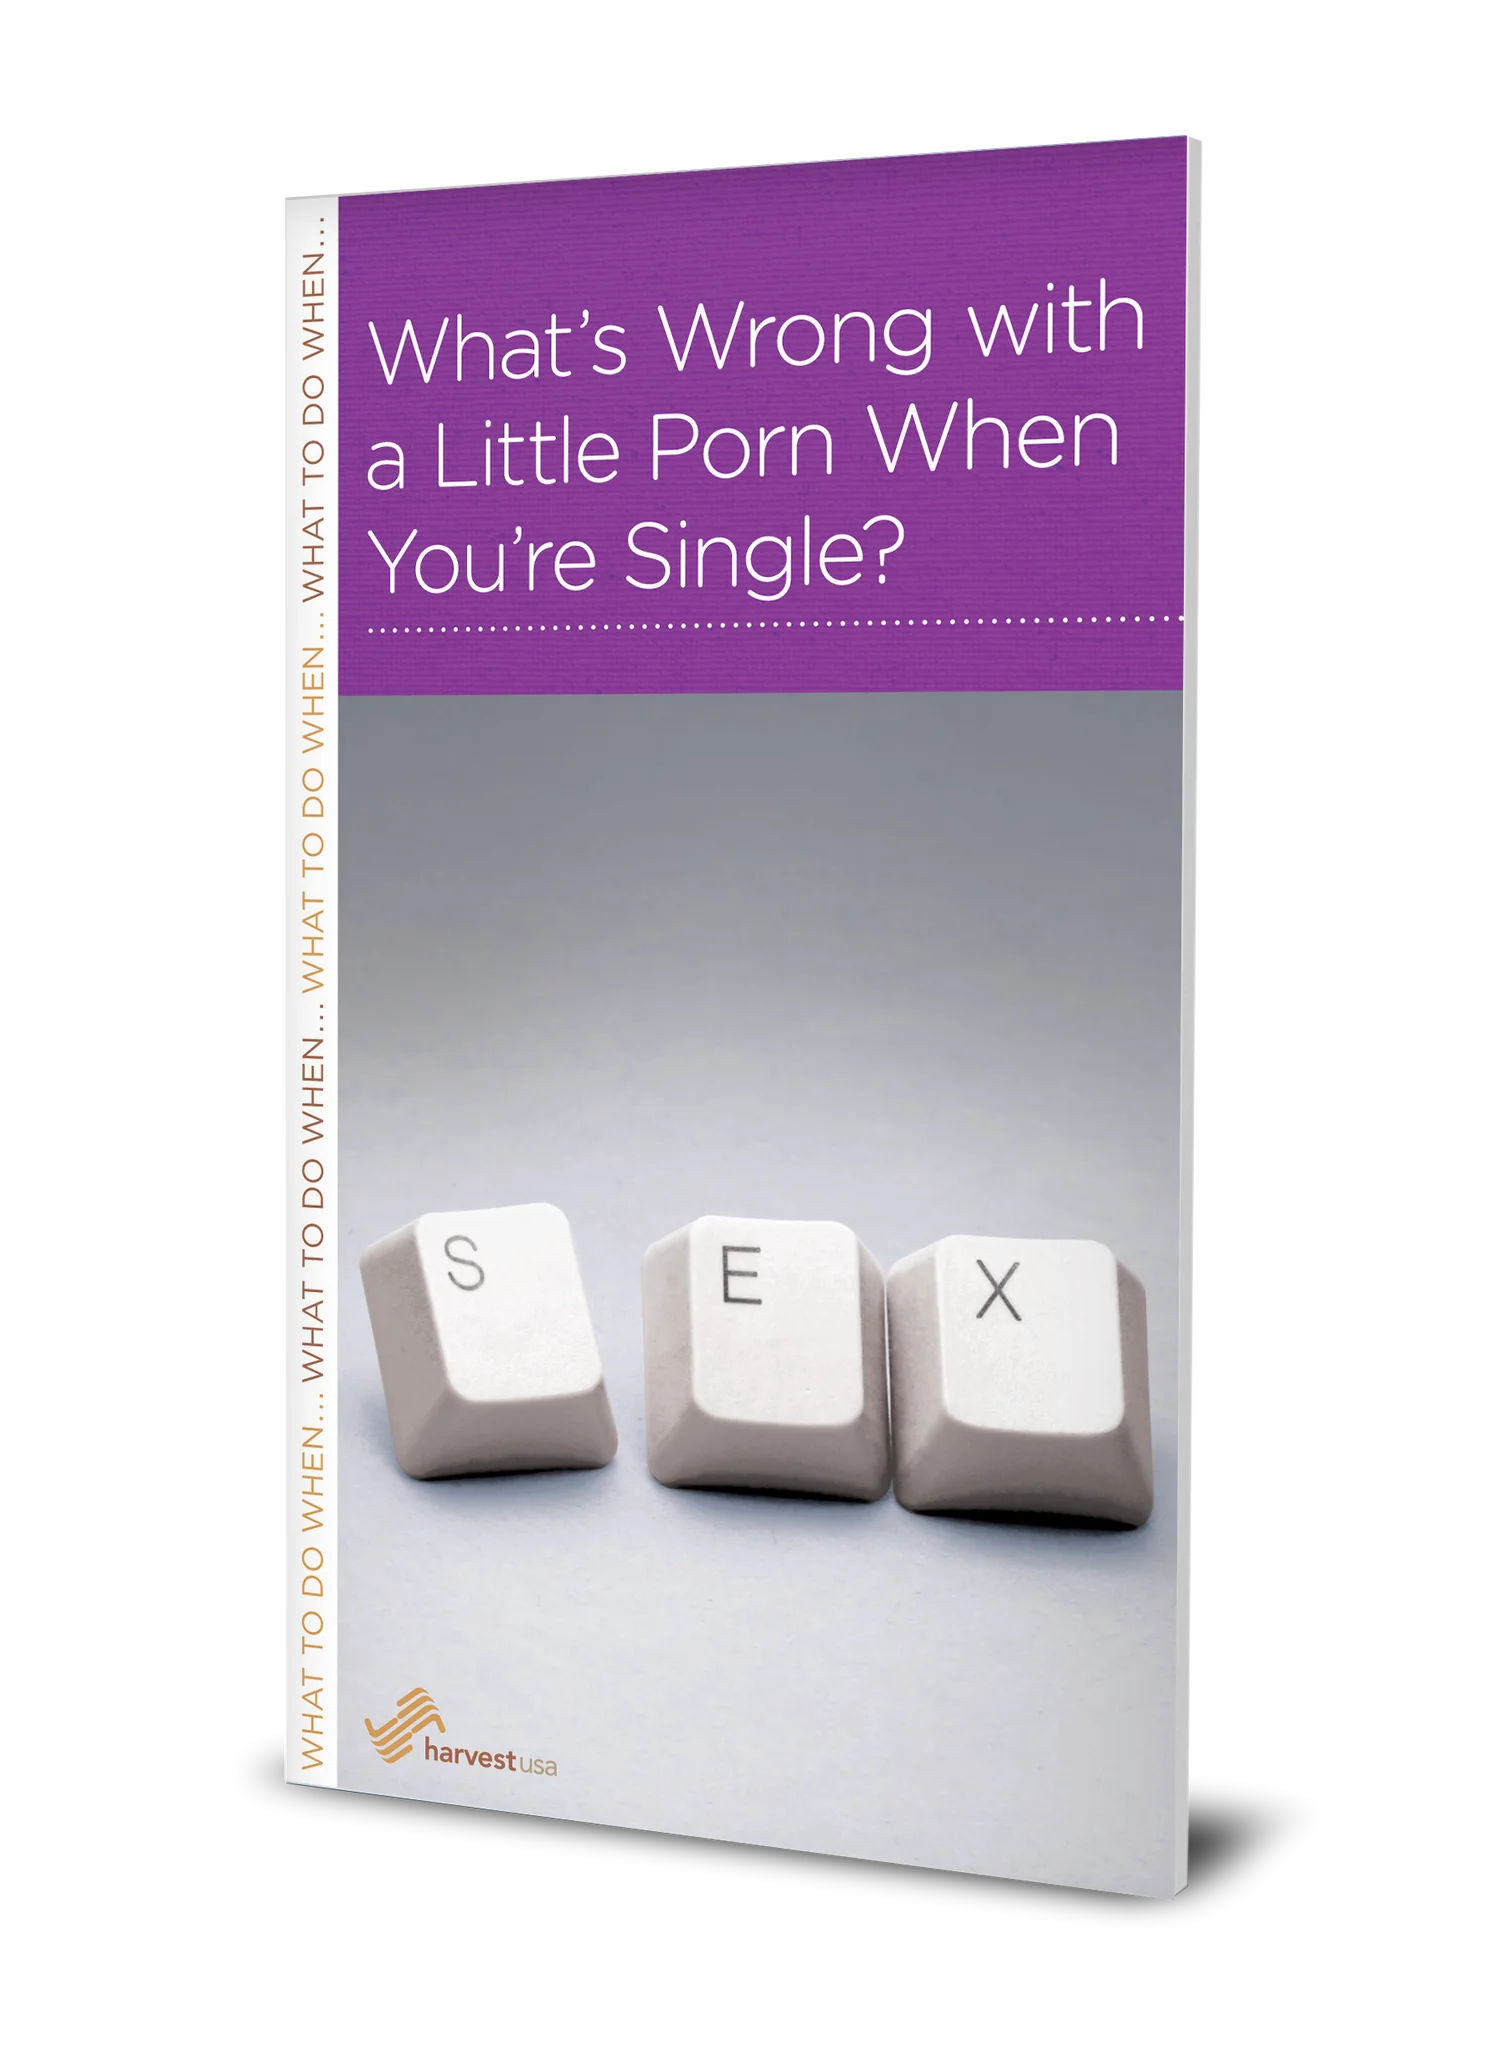 What’s Wrong with a Little Porn When You’re Single? (Minibook)